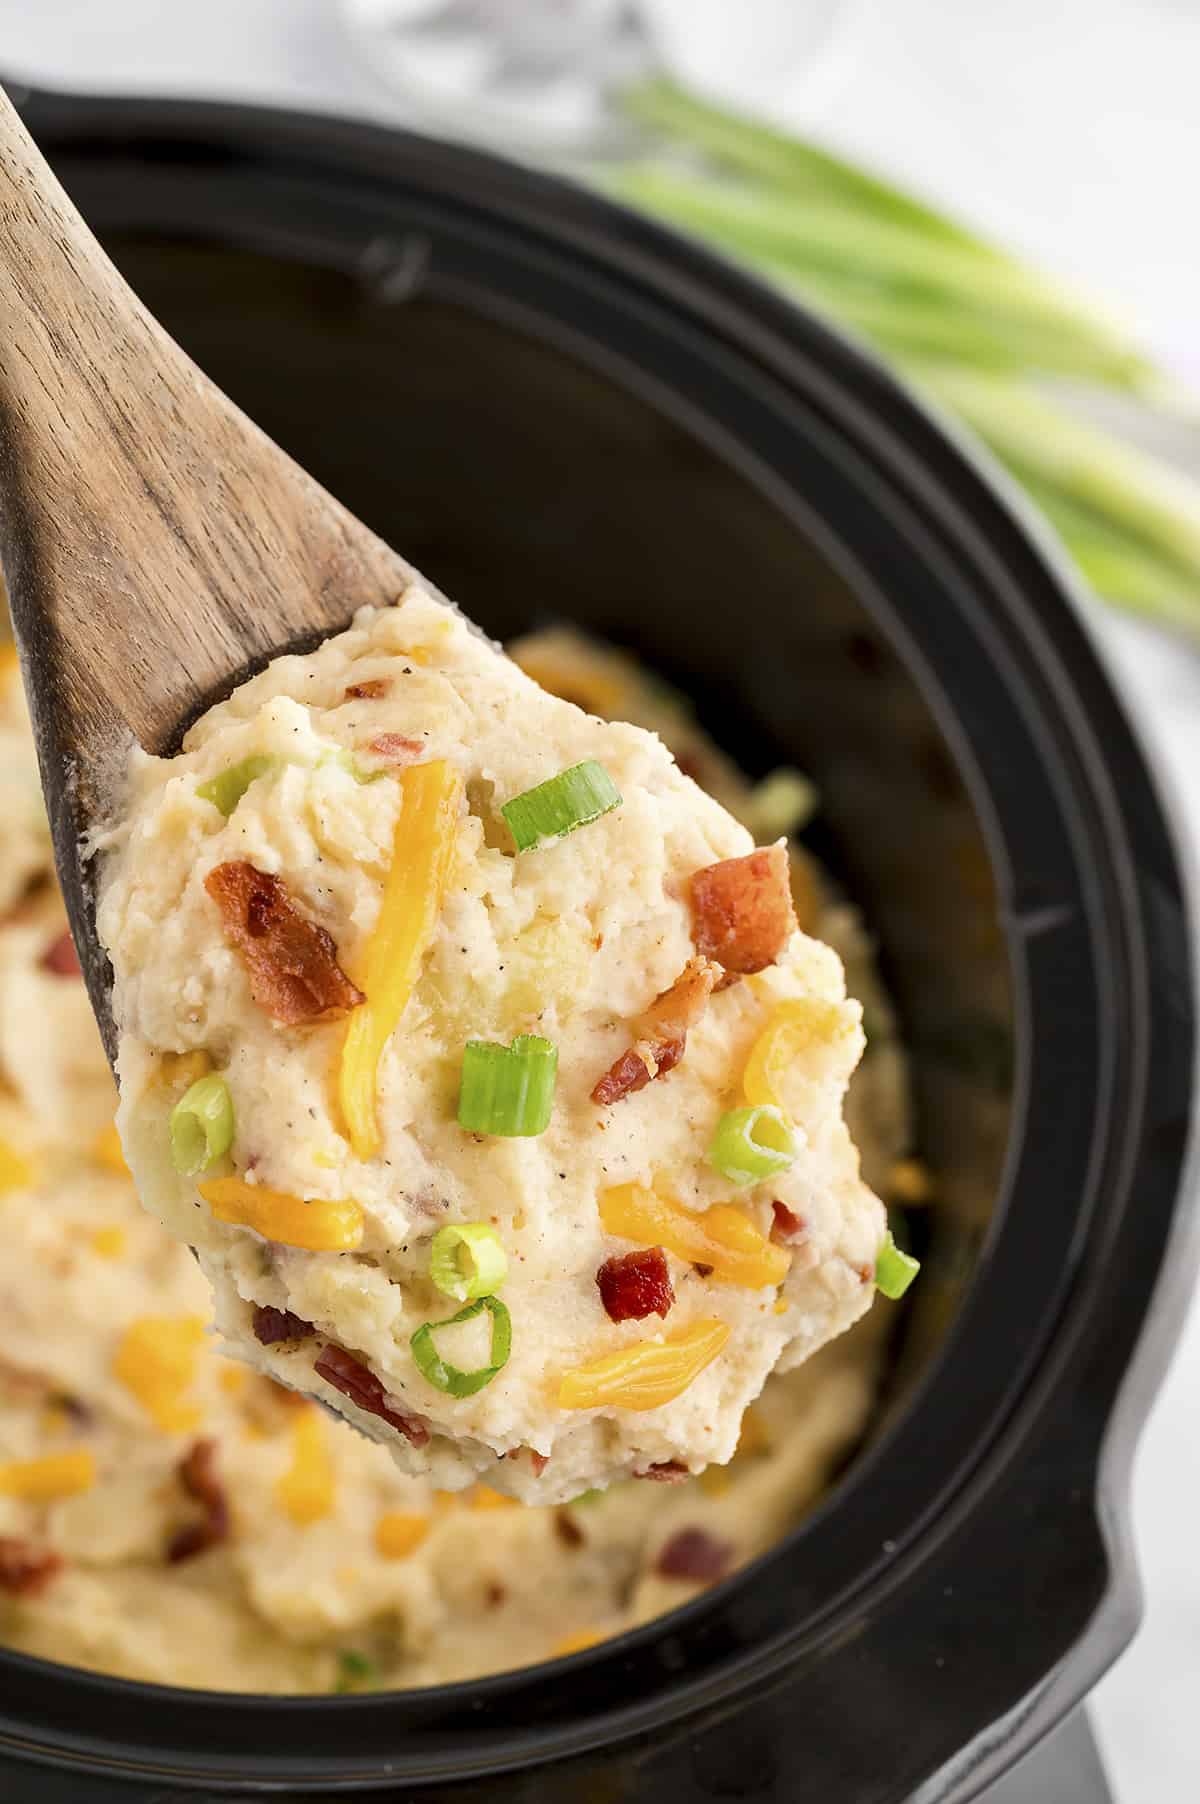 Loaded mashed potatoes on wooden spoon.